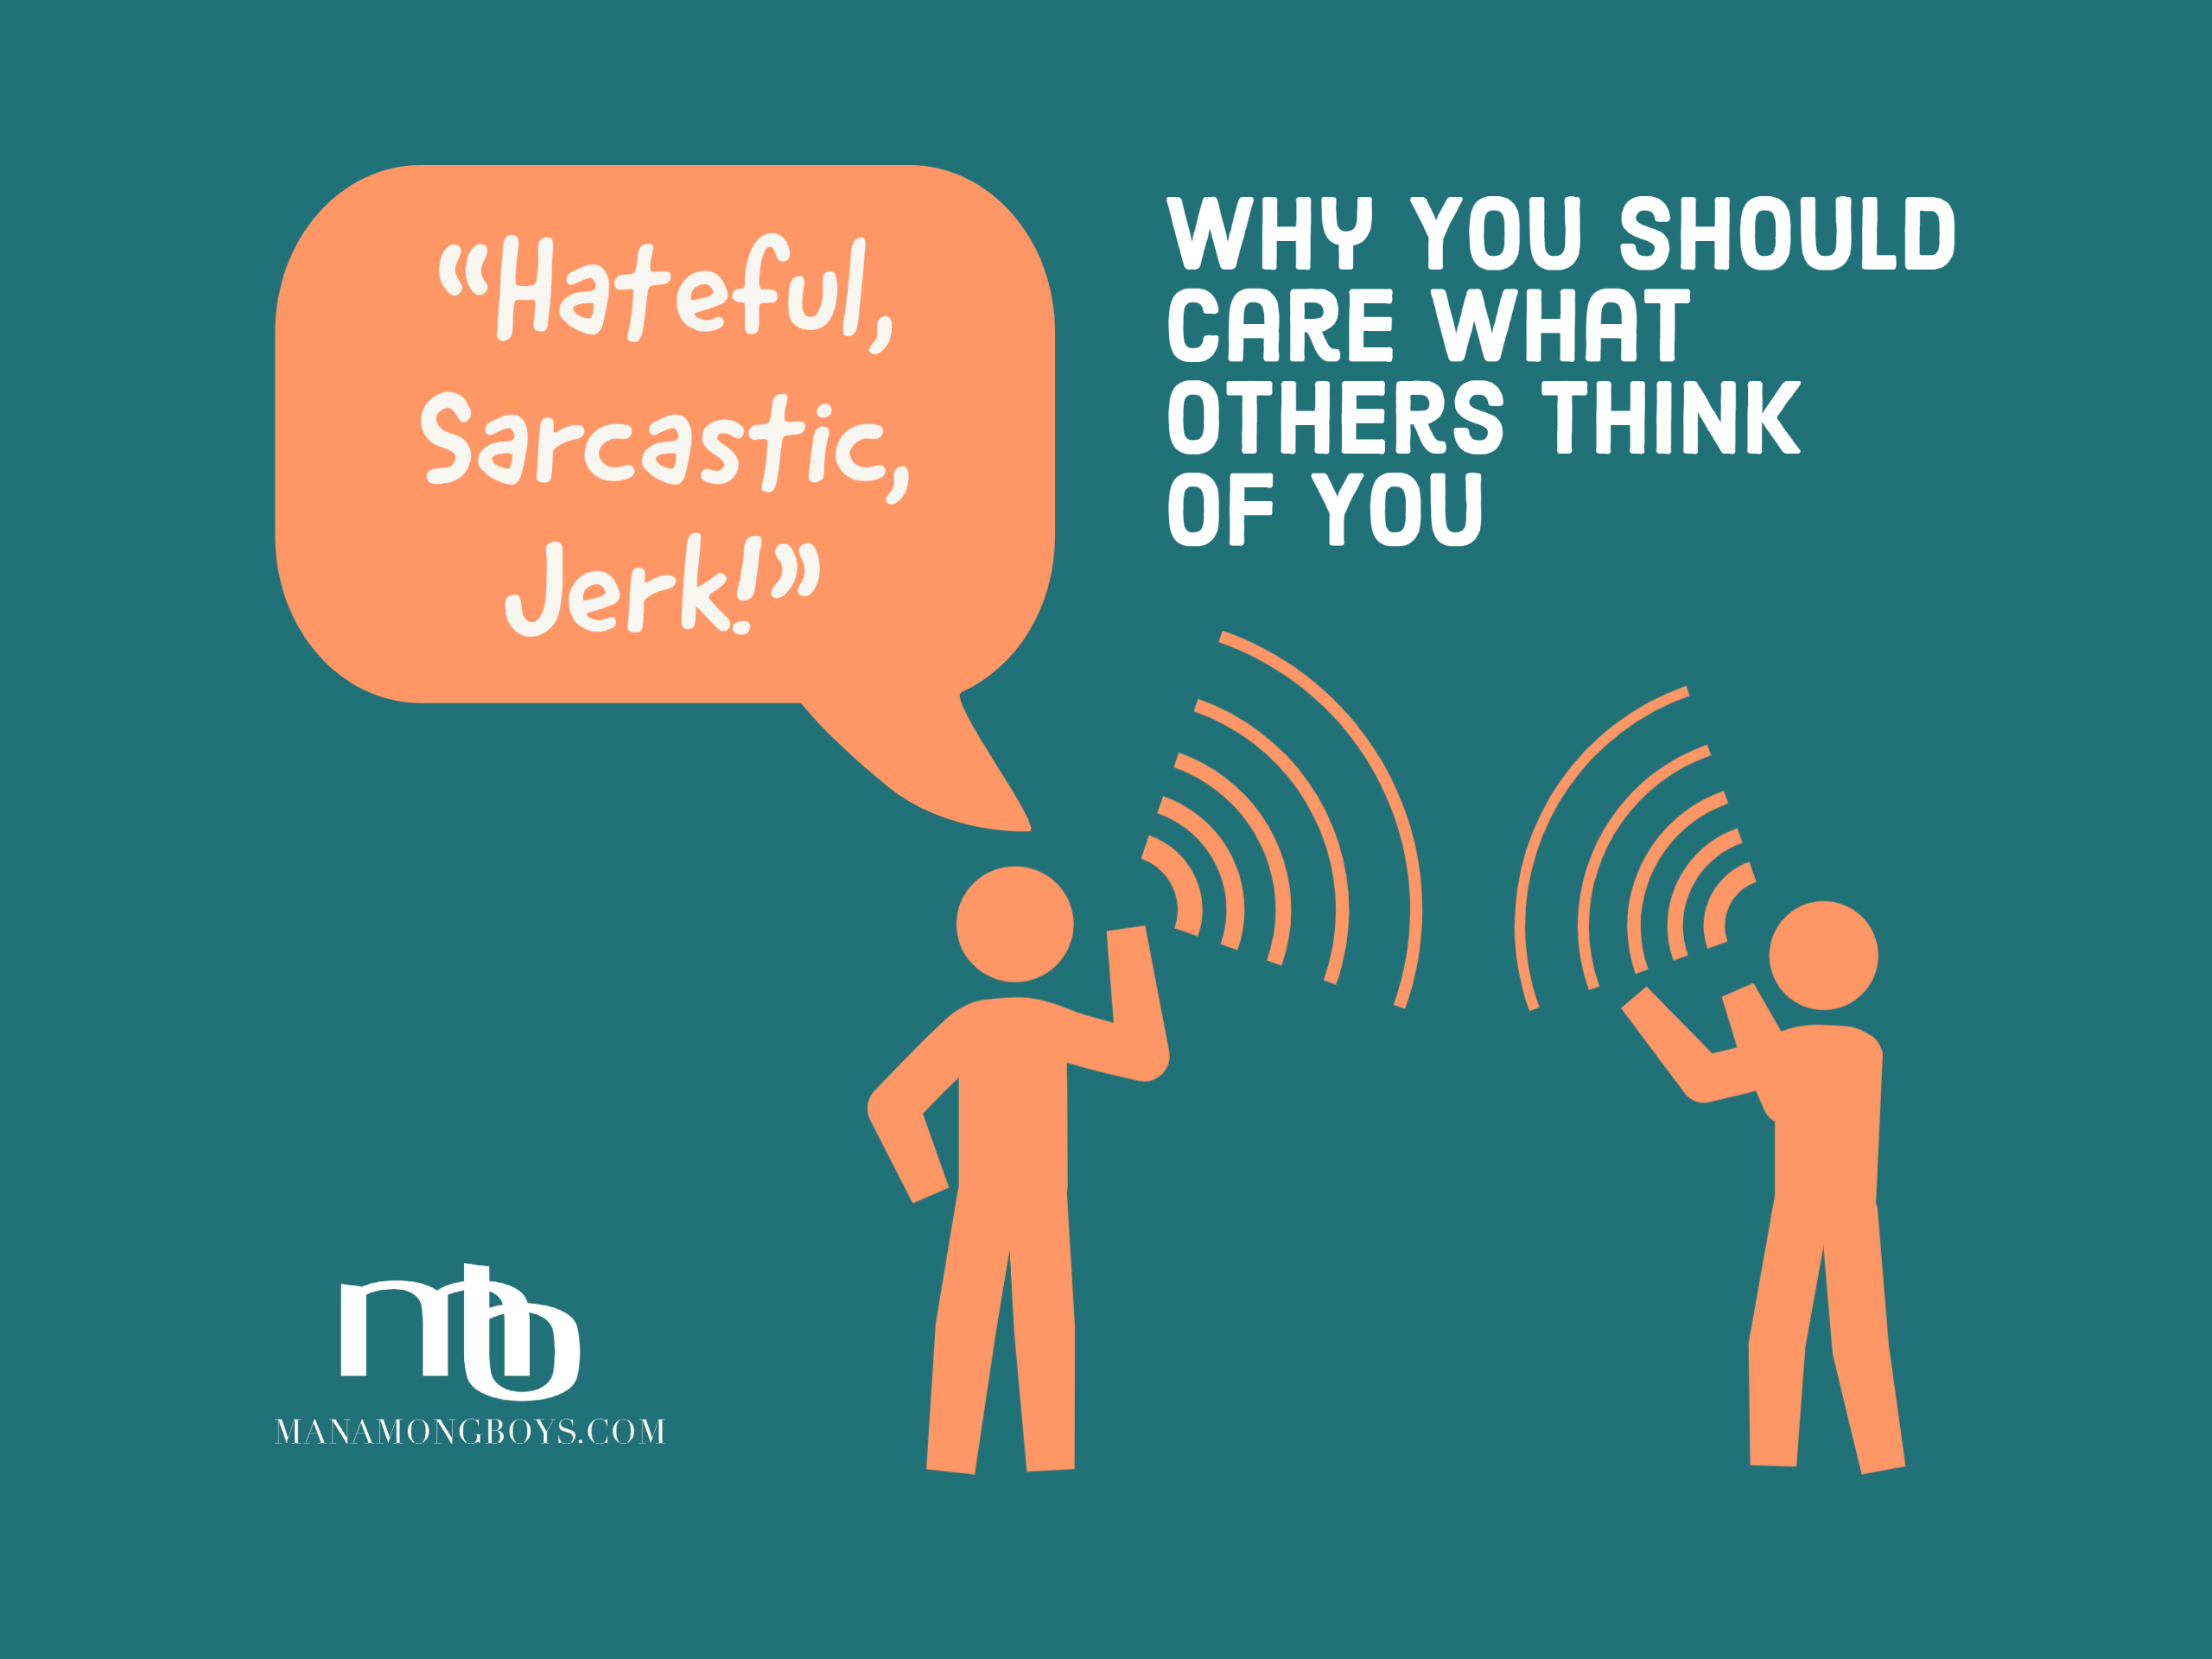 “Hateful, Sarcastic, Jerk!”  Why You Should Care What Others Think of You